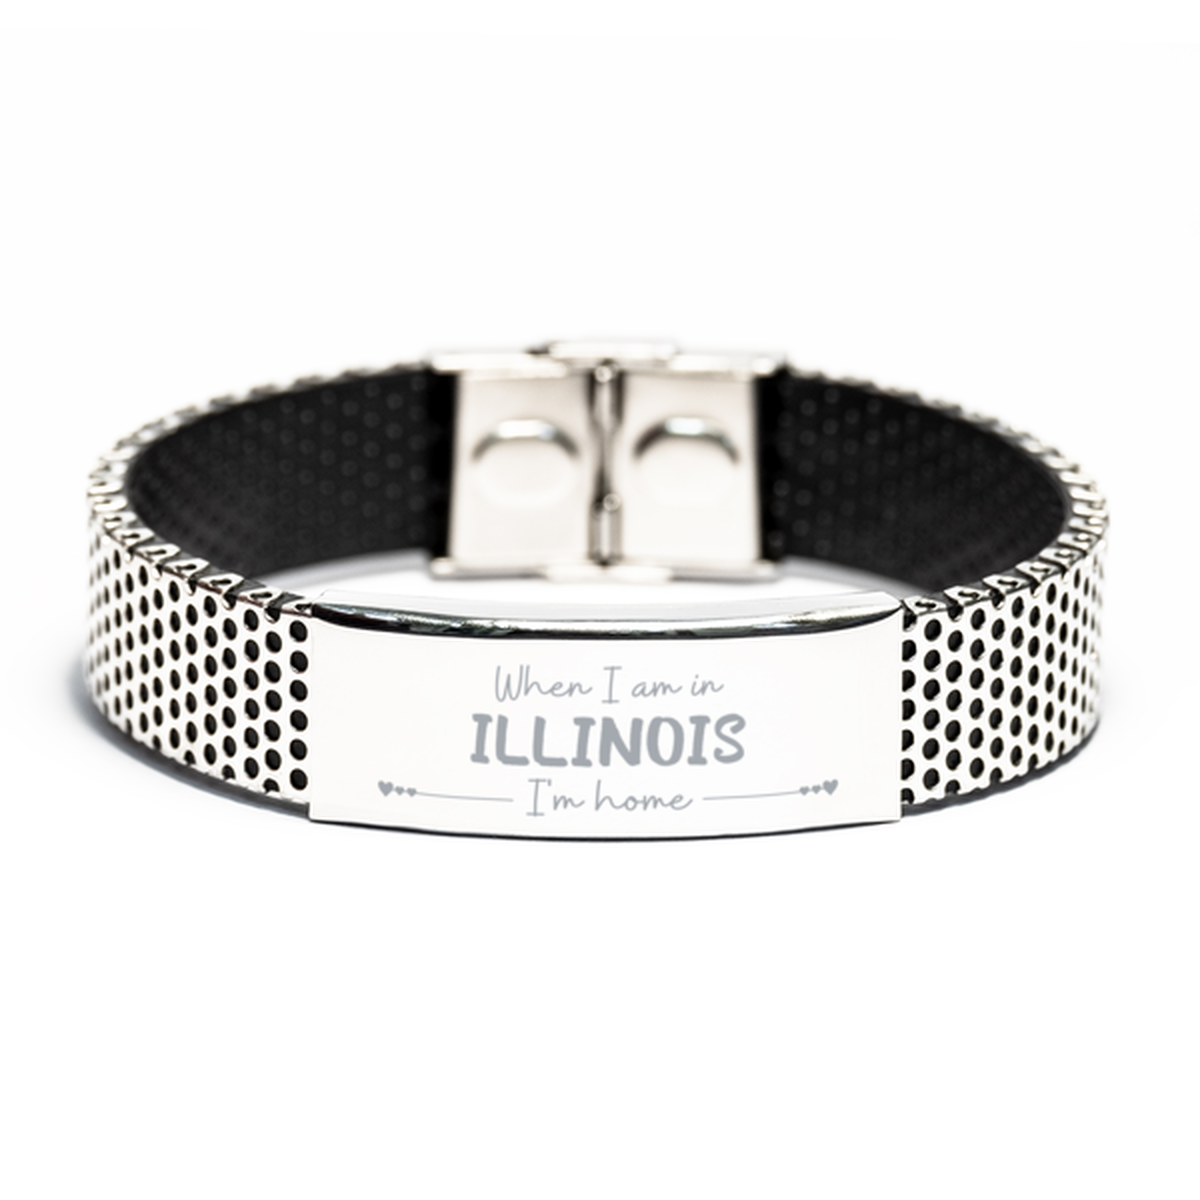 When I am in Illinois I'm home Stainless Steel Bracelet, Cheap Gifts For Illinois, State Illinois Birthday Gifts for Friends Coworker